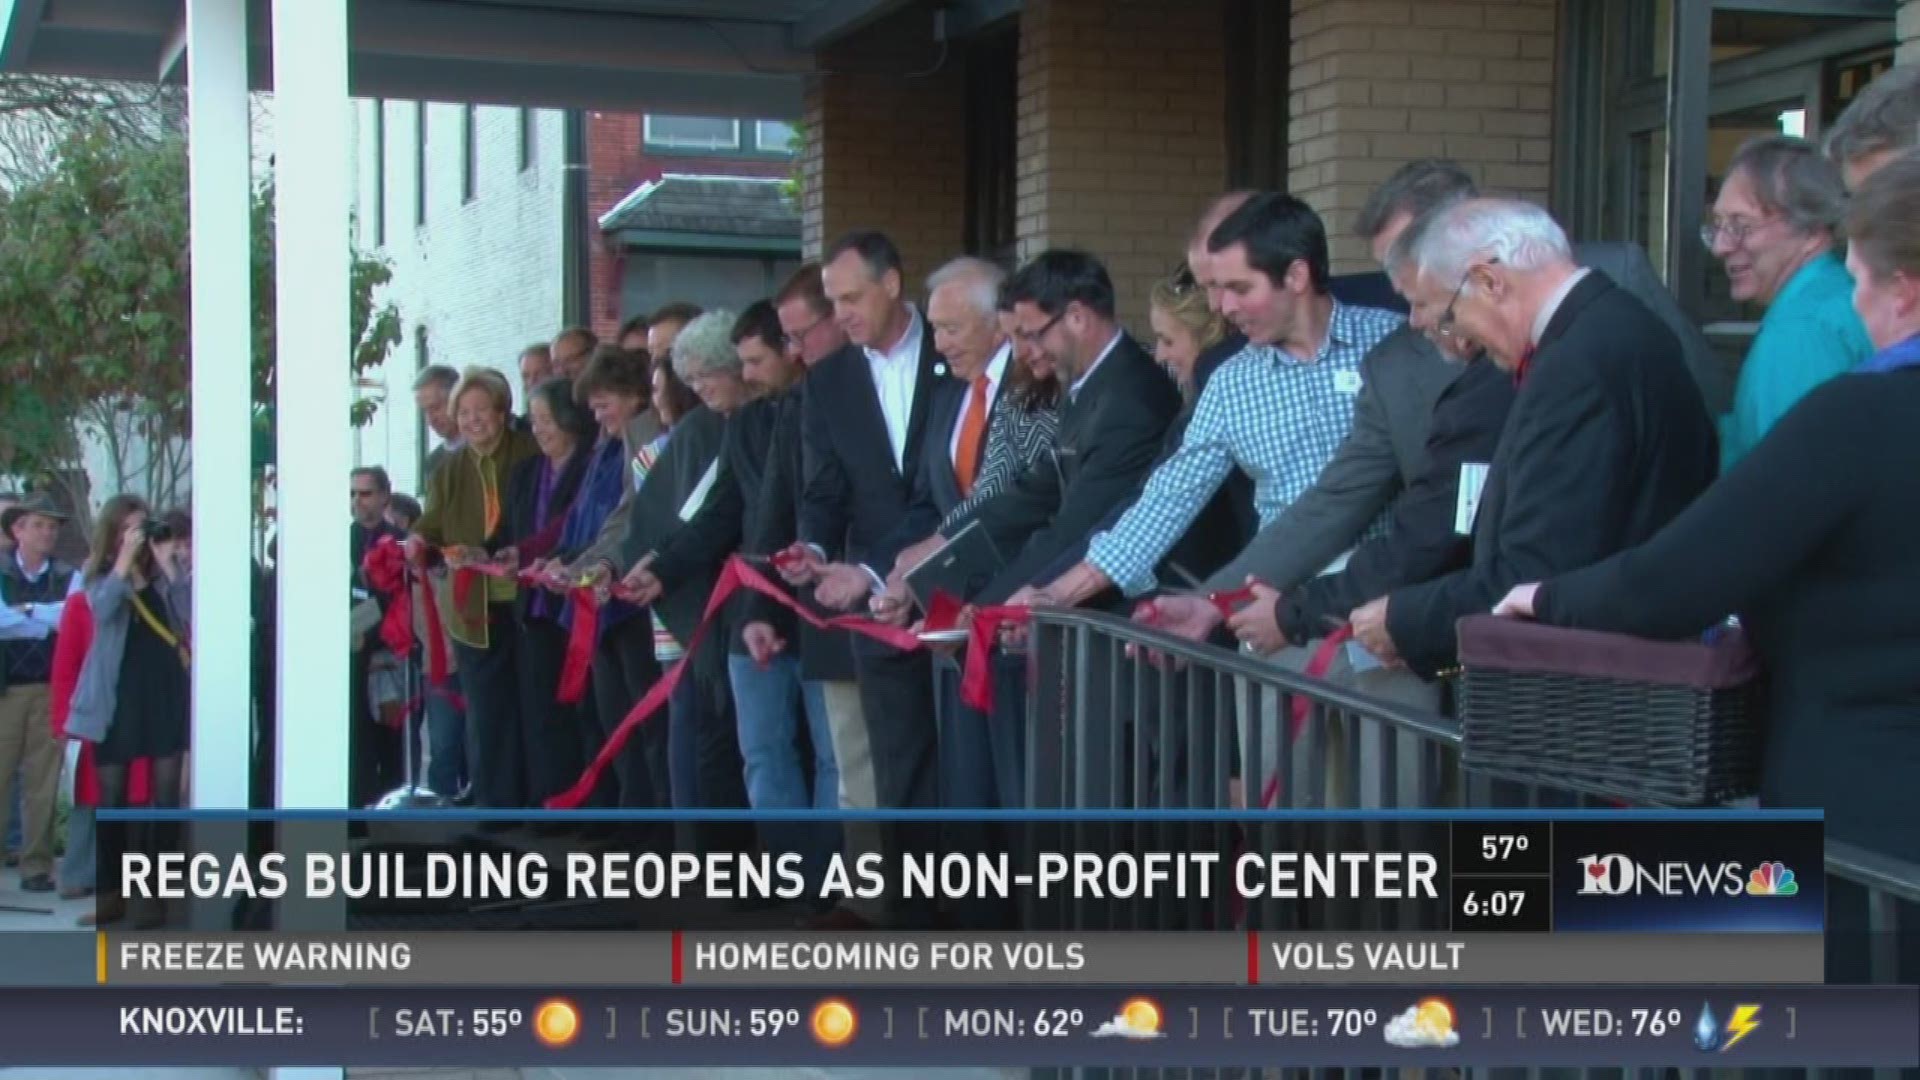 City leaders cut the ribbon on the newly renovated Regas building on Friday, celebrating the opening of the non-profit center. November 13, 2015